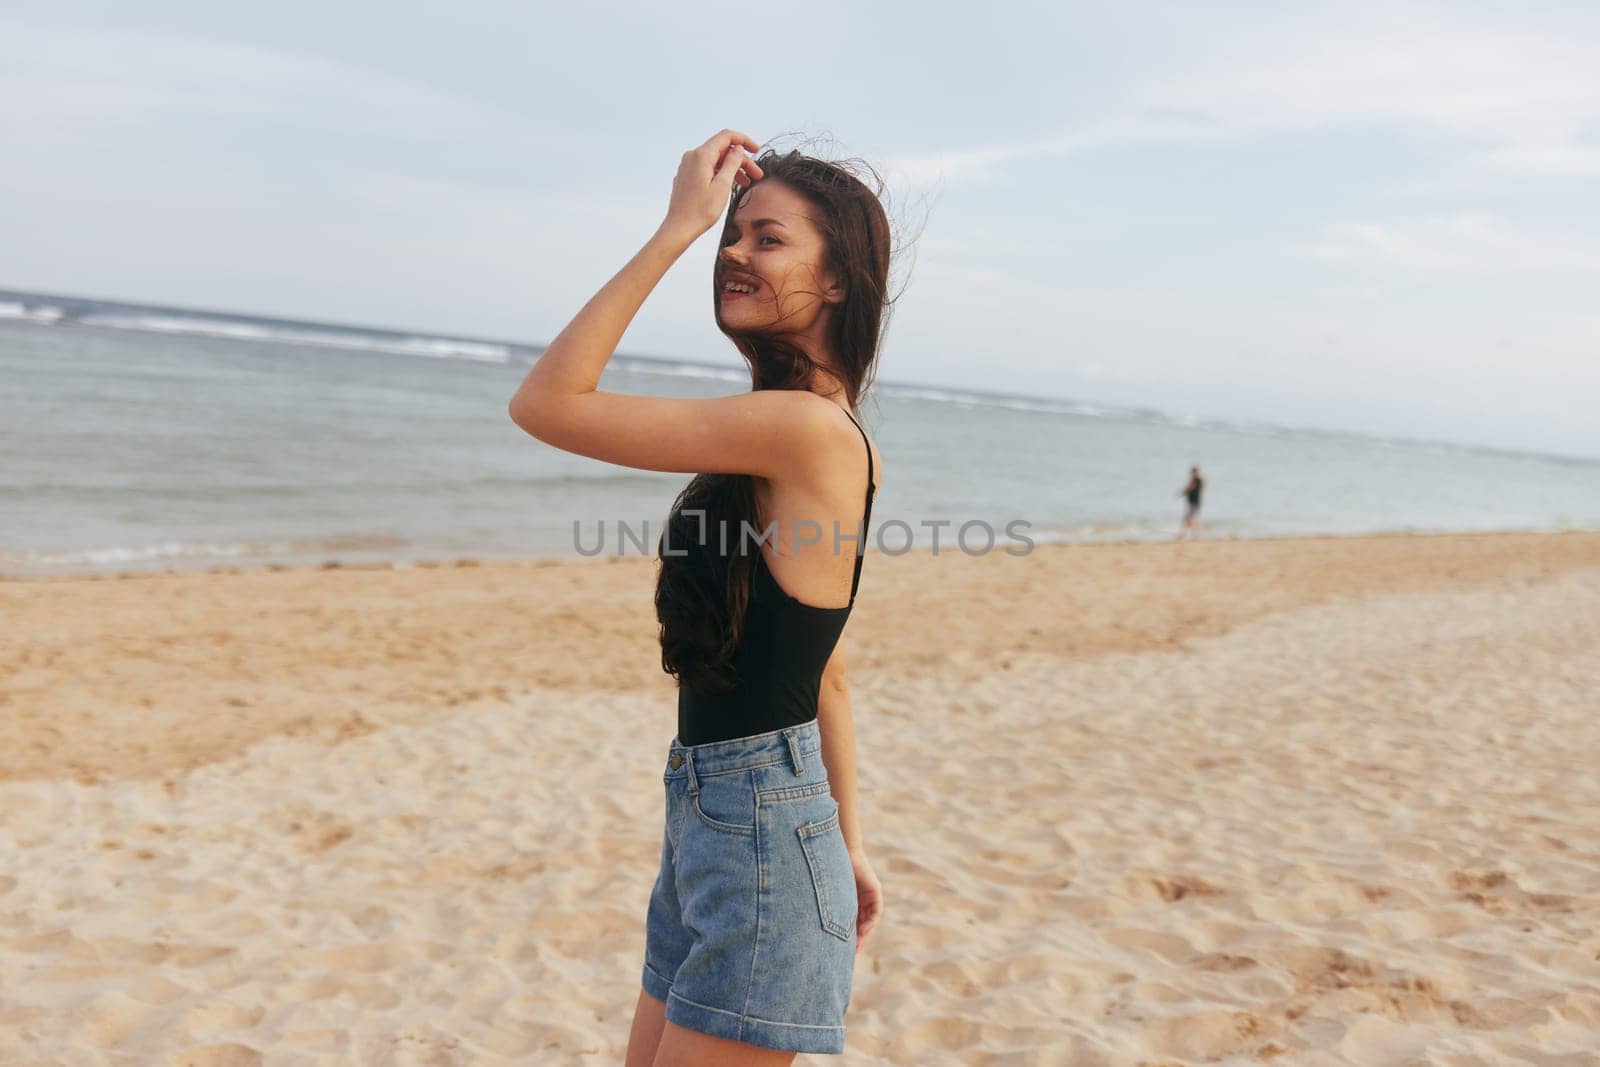 leisure woman female person vacation sky water lifestyle sand shore sunset happiness holiday beach smile ocean tropical summer enjoyment long hair sea